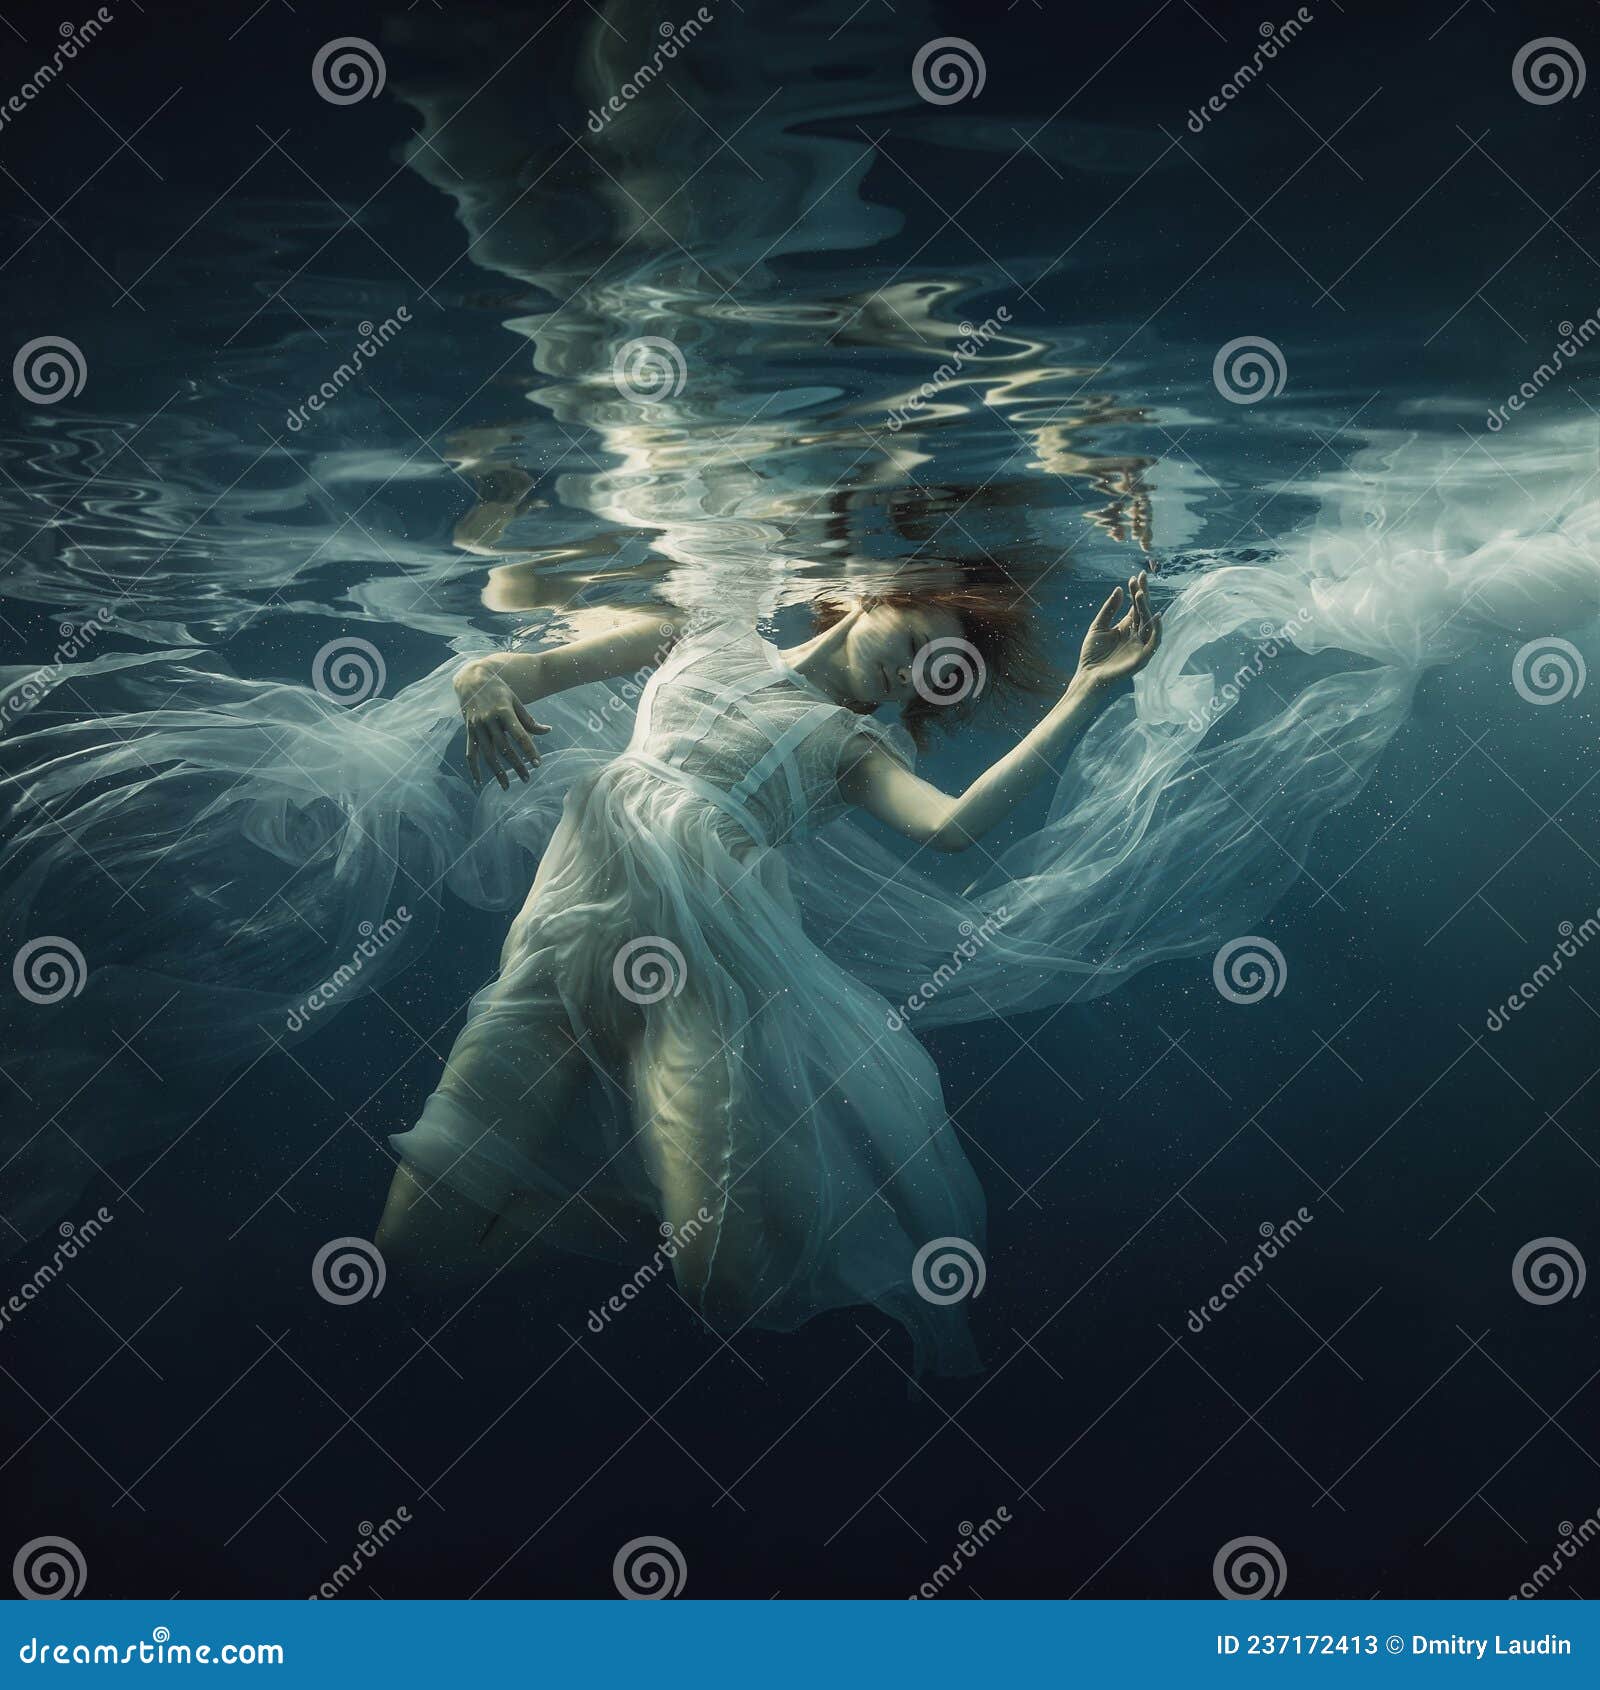 A Girl in a White Dress Posing Underwater on a Dark Background As If ...